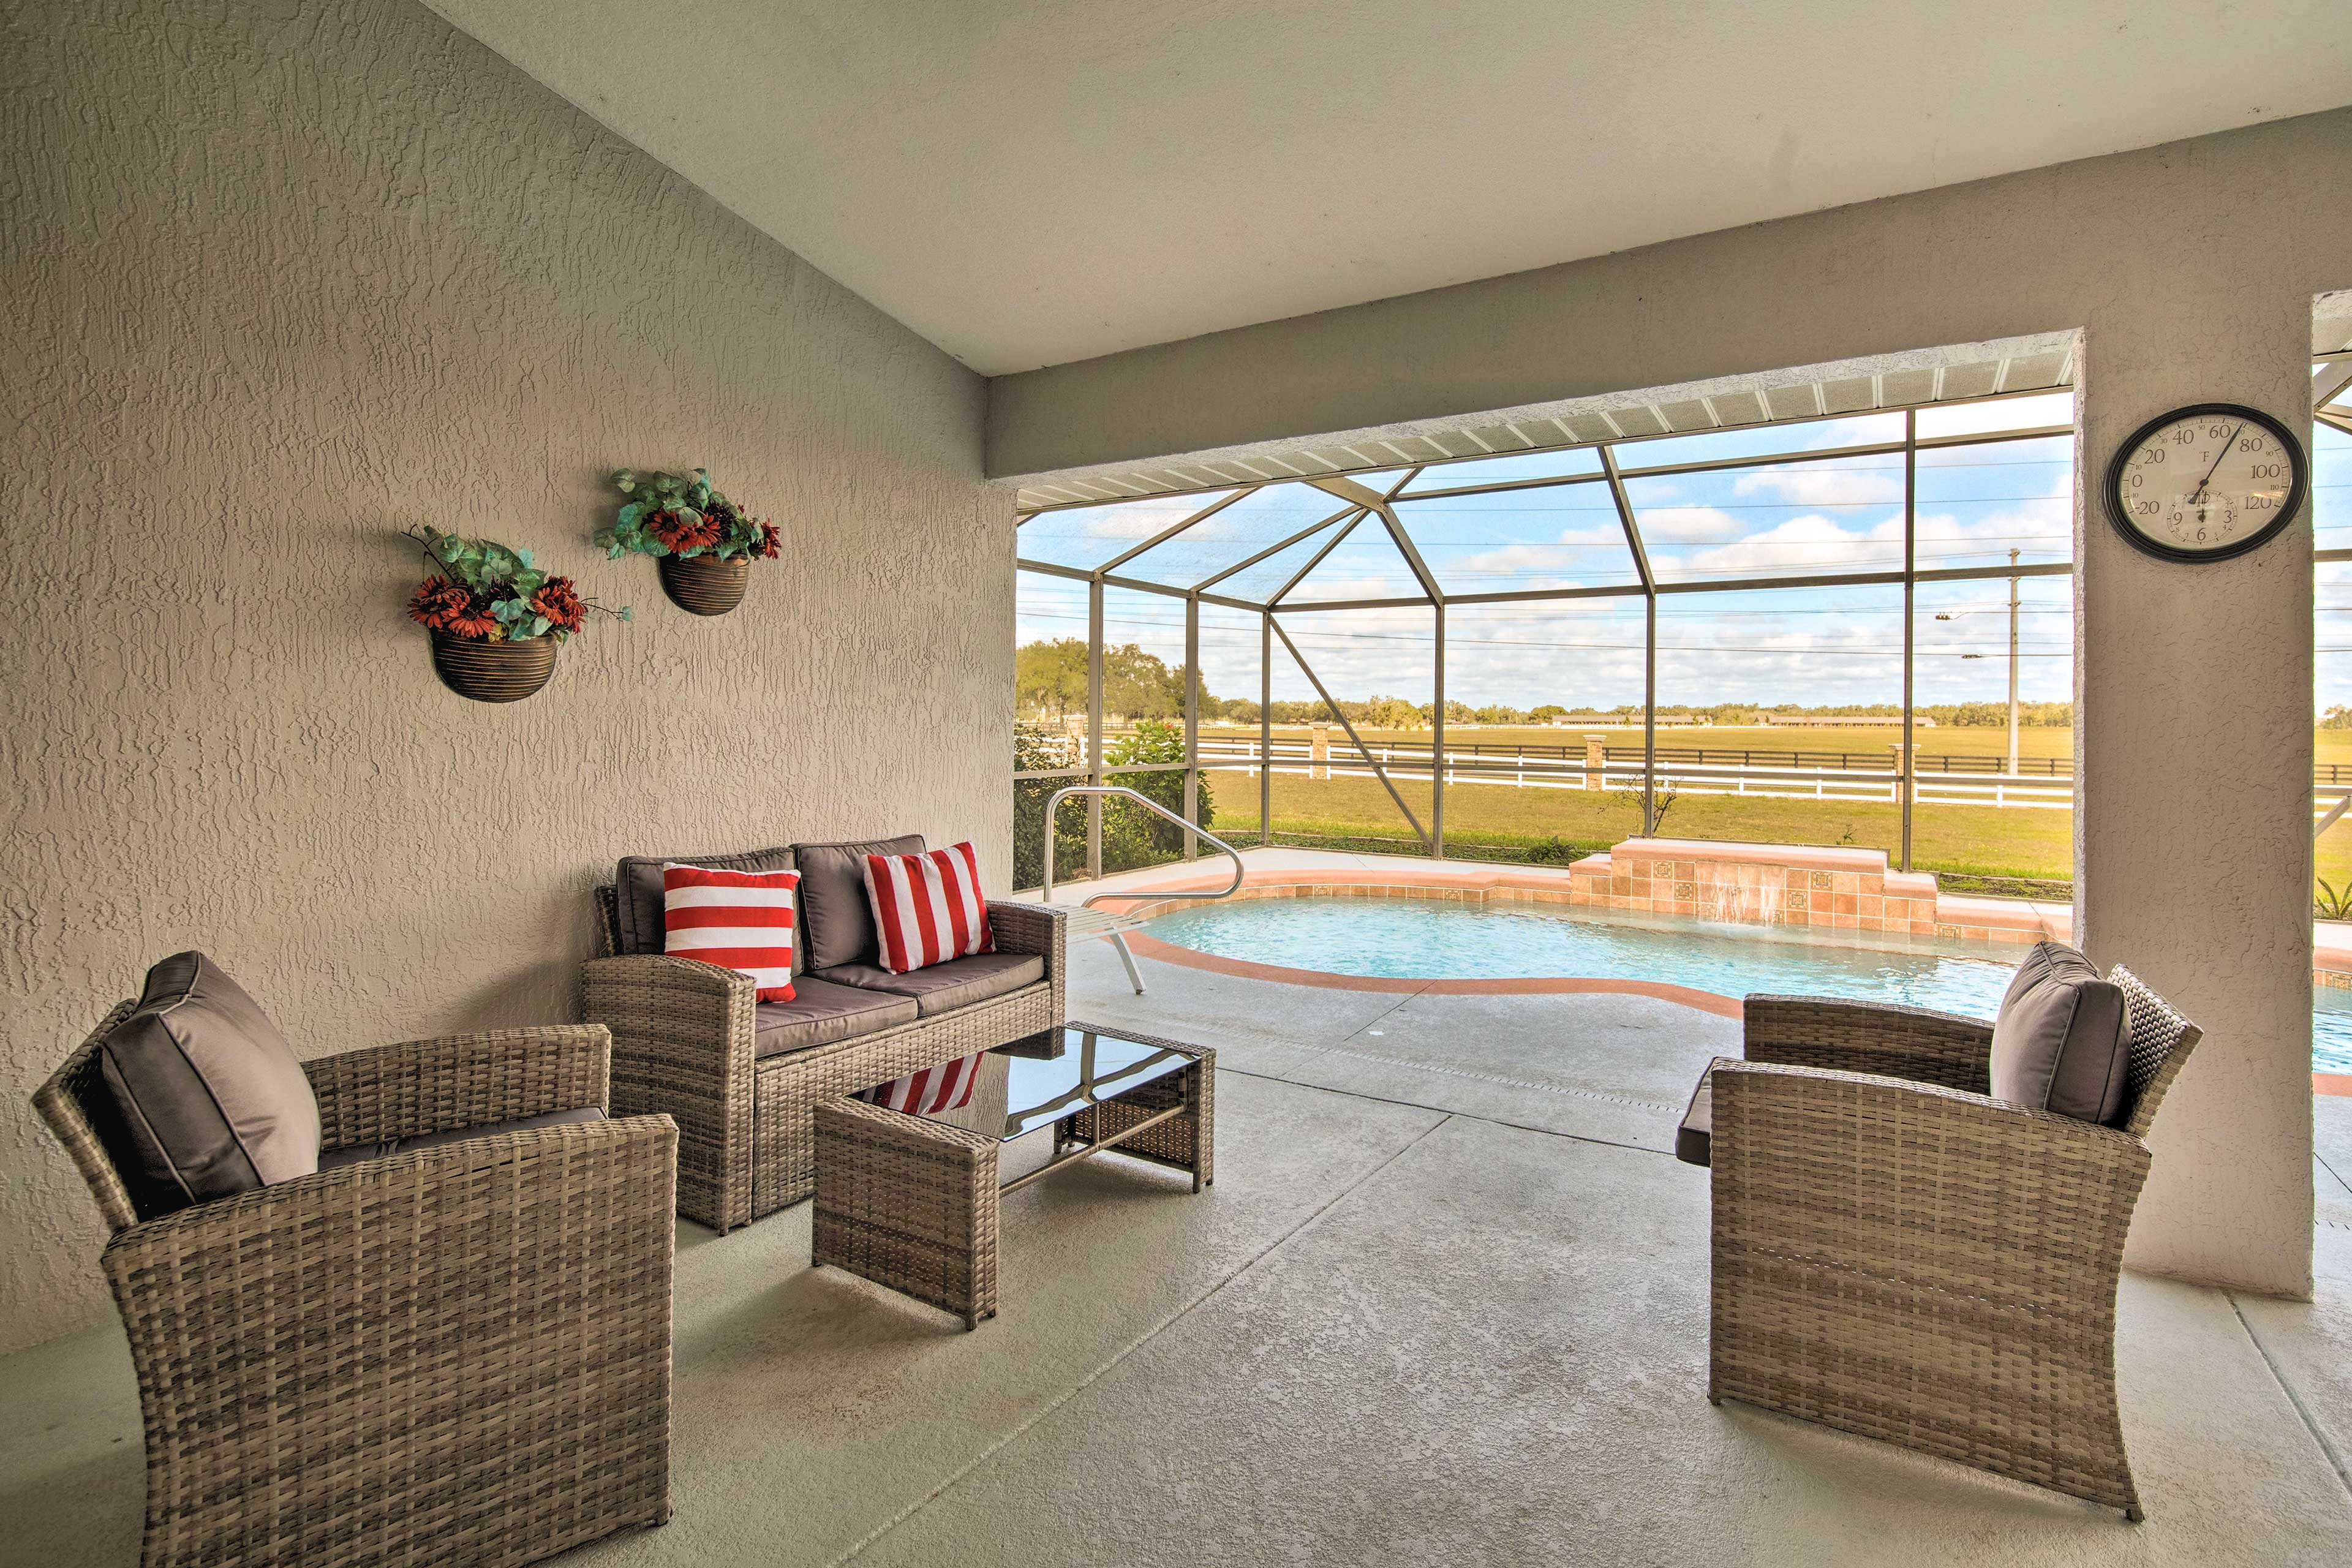 Covered Patio w/ Seating | Lanai | Private Pool (1'-4')